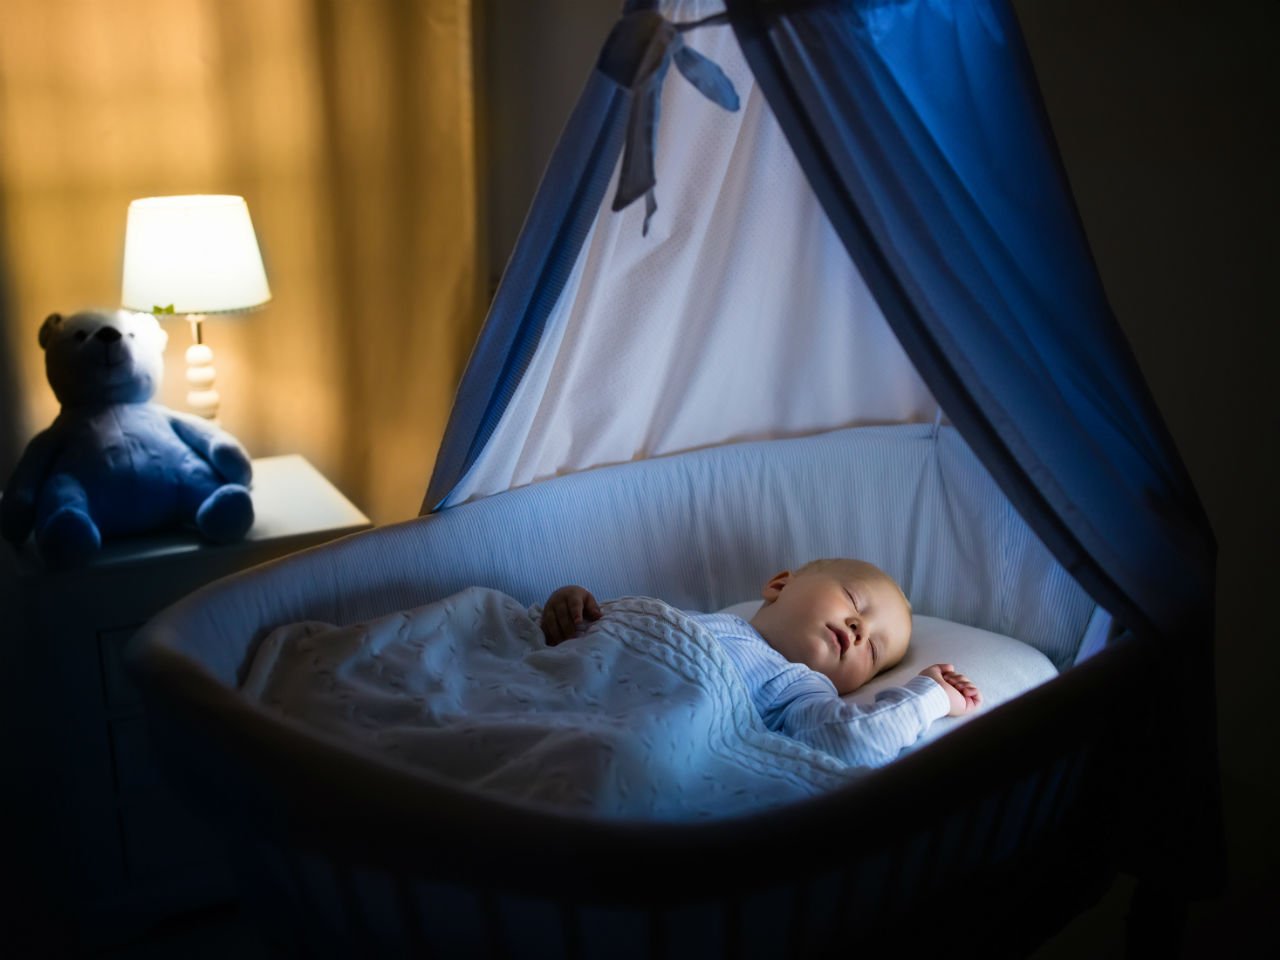 white noise for baby sleep: is it safe for your little one's ears?